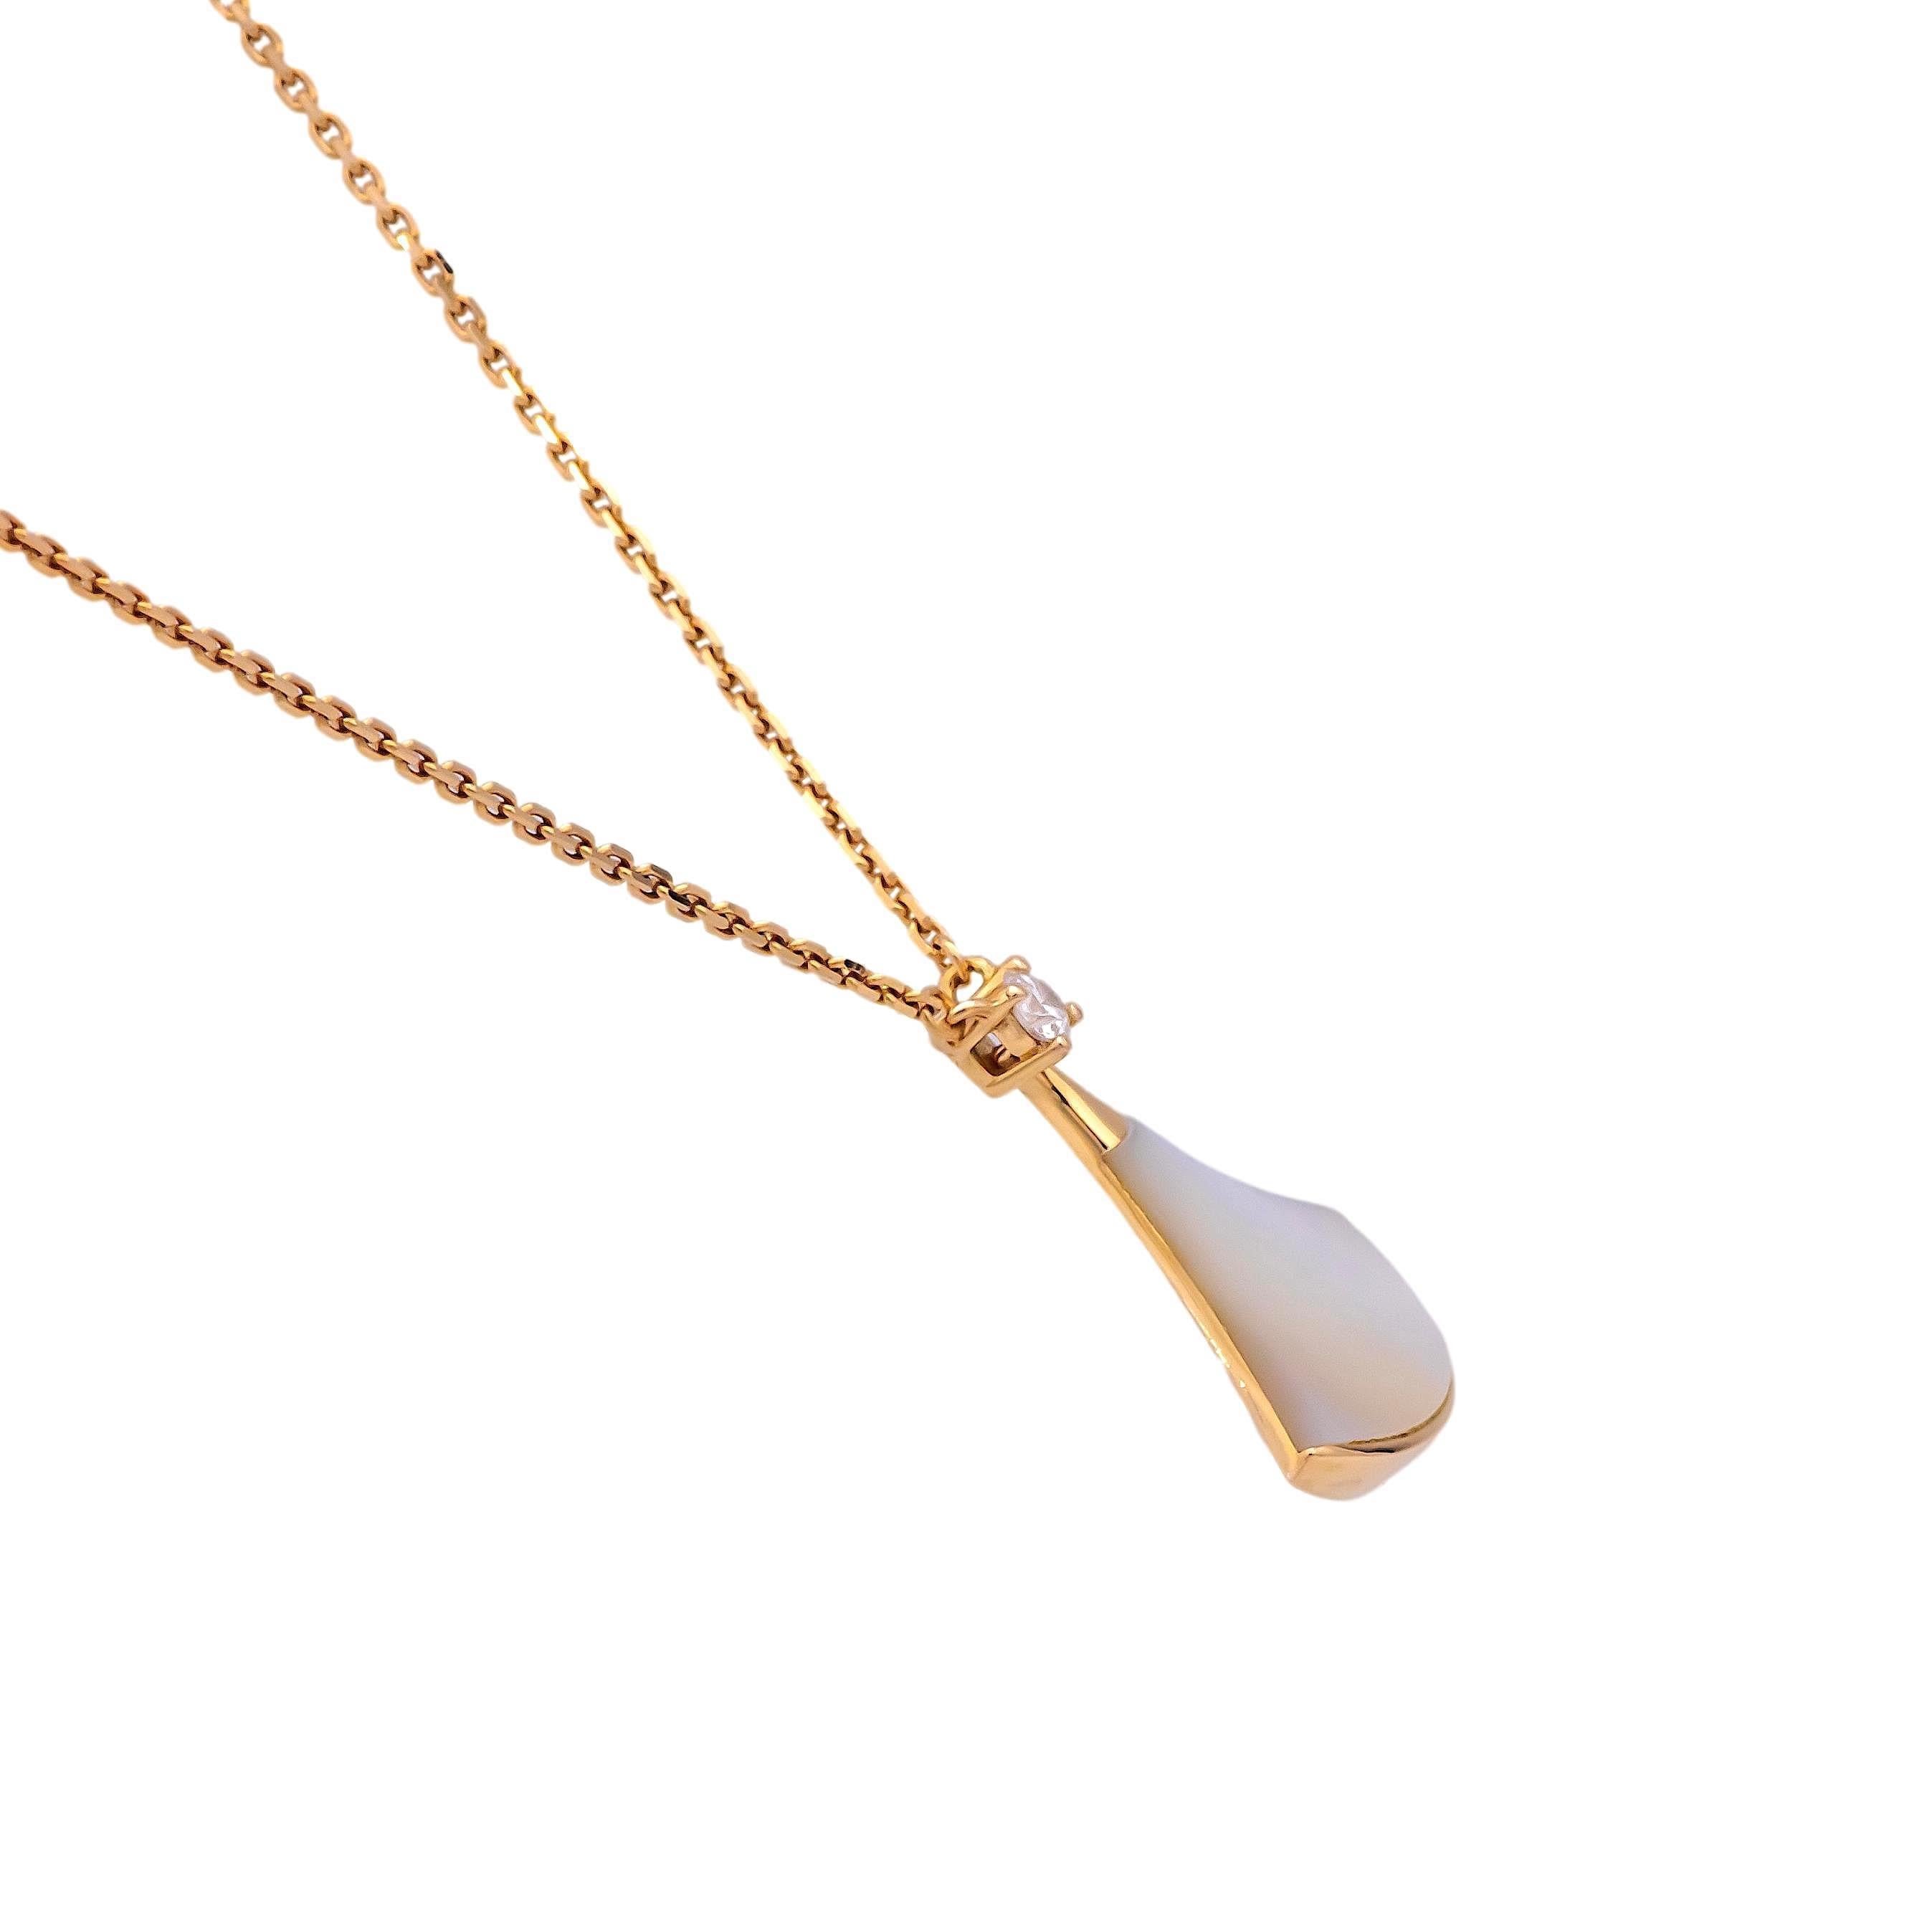 Bvlgari pendant necklace from the Diva's Dream collection finely crafted in 18 karat rose gold featuring a round brilliant cut diamond set in four prongs weighing 0.10 carats sitting on top of a mother of pearl pendant hanging off an 18 inch link